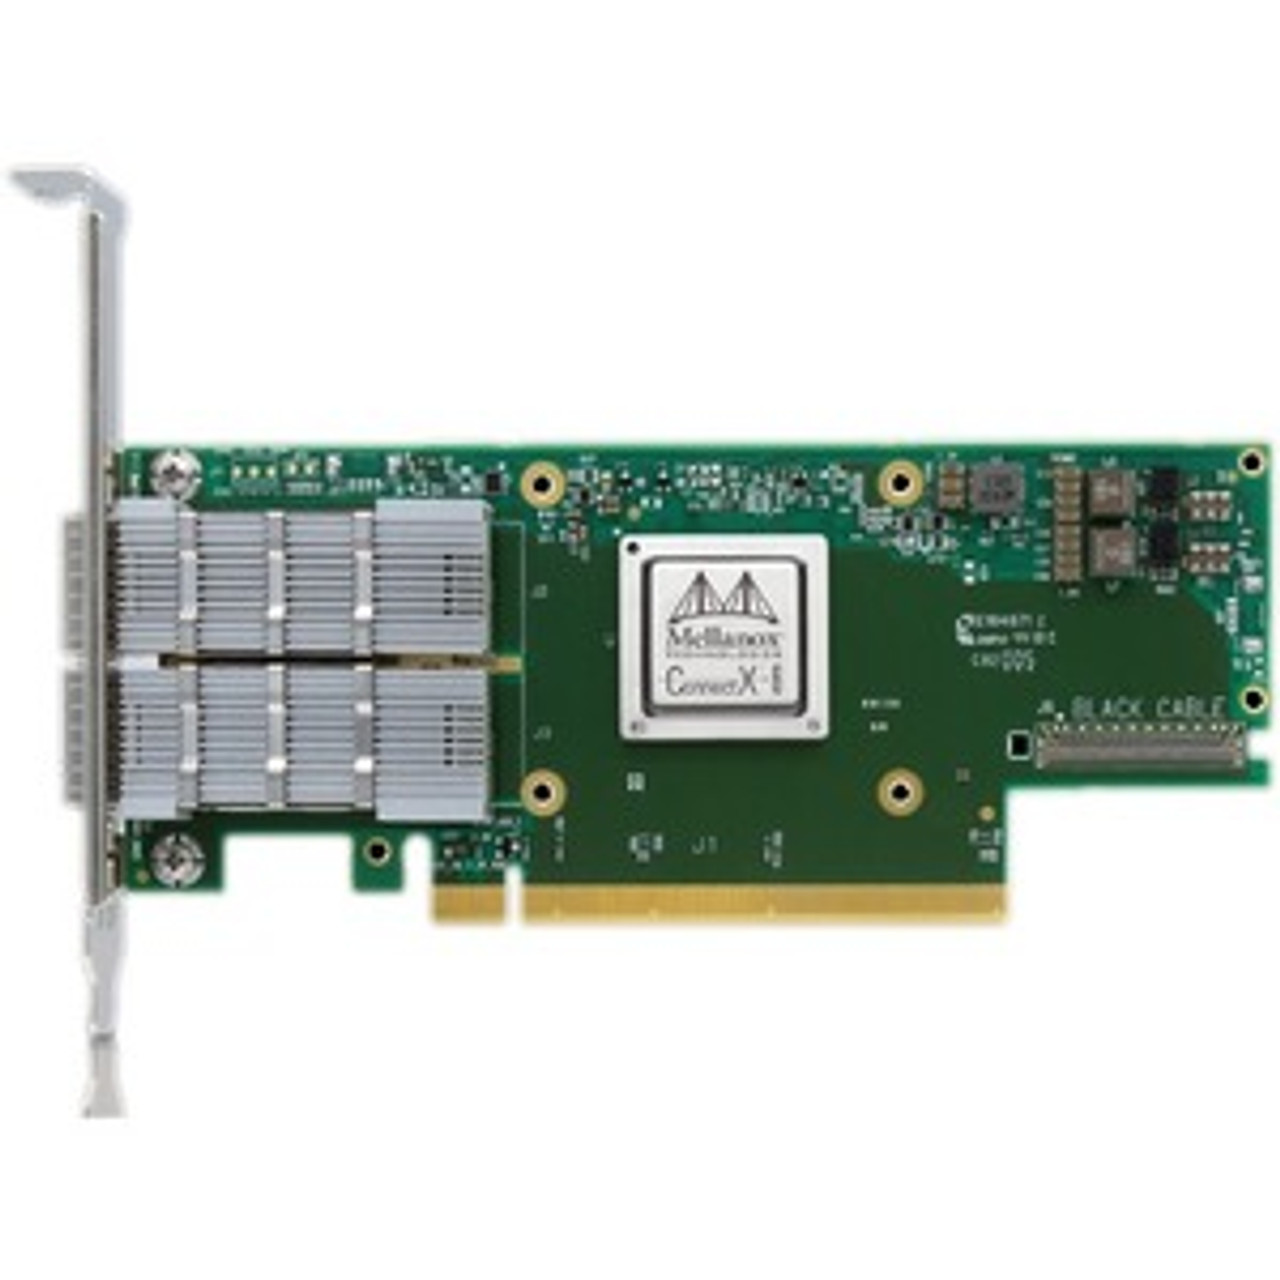 MCX653435A-HDAI NVIDIA ConnectX-6 VPI Adapter Card HDR InfiniBand and 200GbE for OCP 3.0 with Host Management Single-Port QSFP56 PCIe4.0 x16 Internal